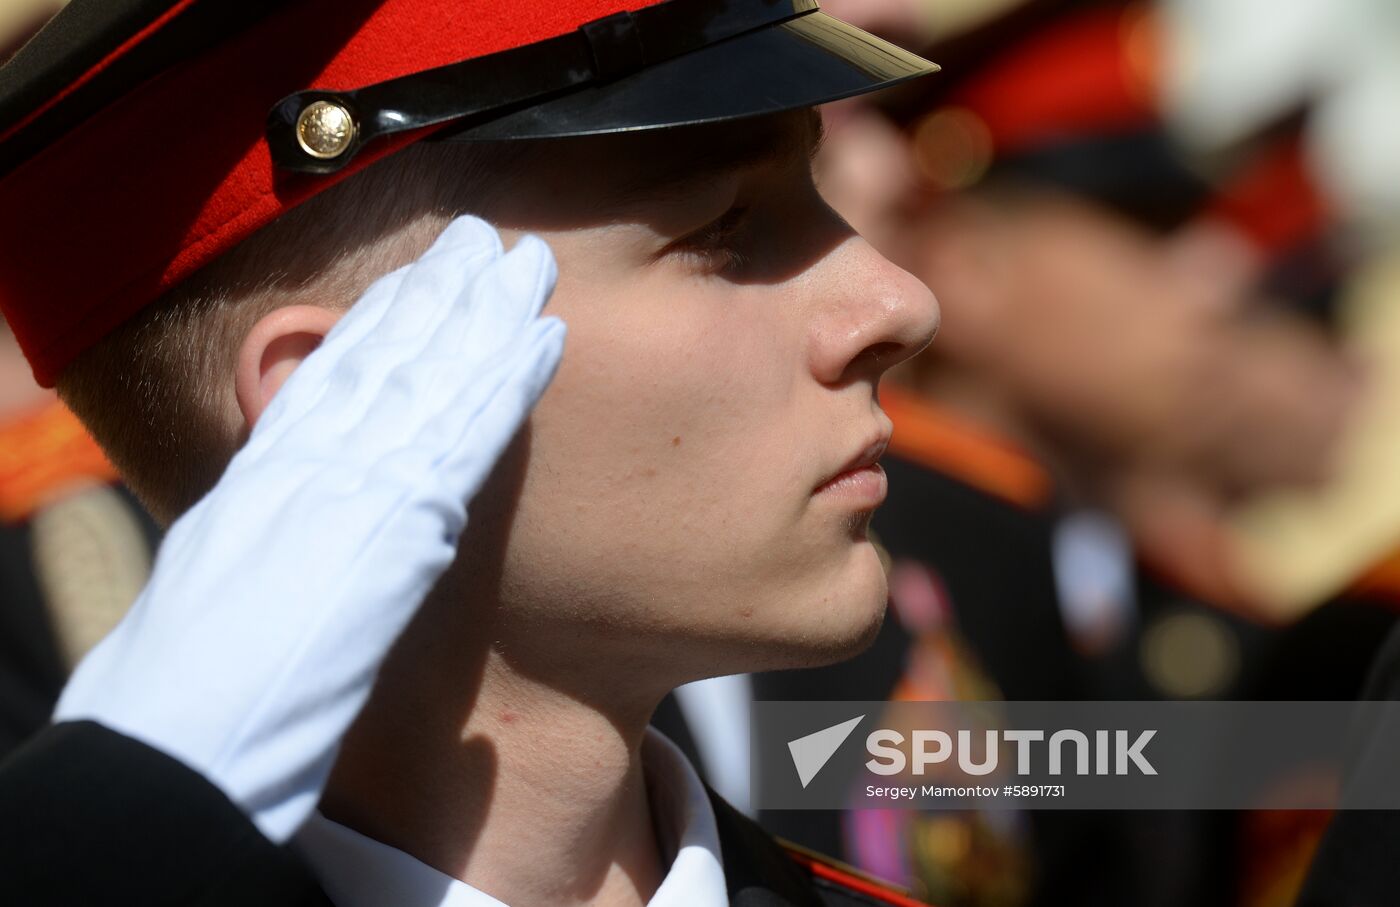 Russia Cadets Last Bell